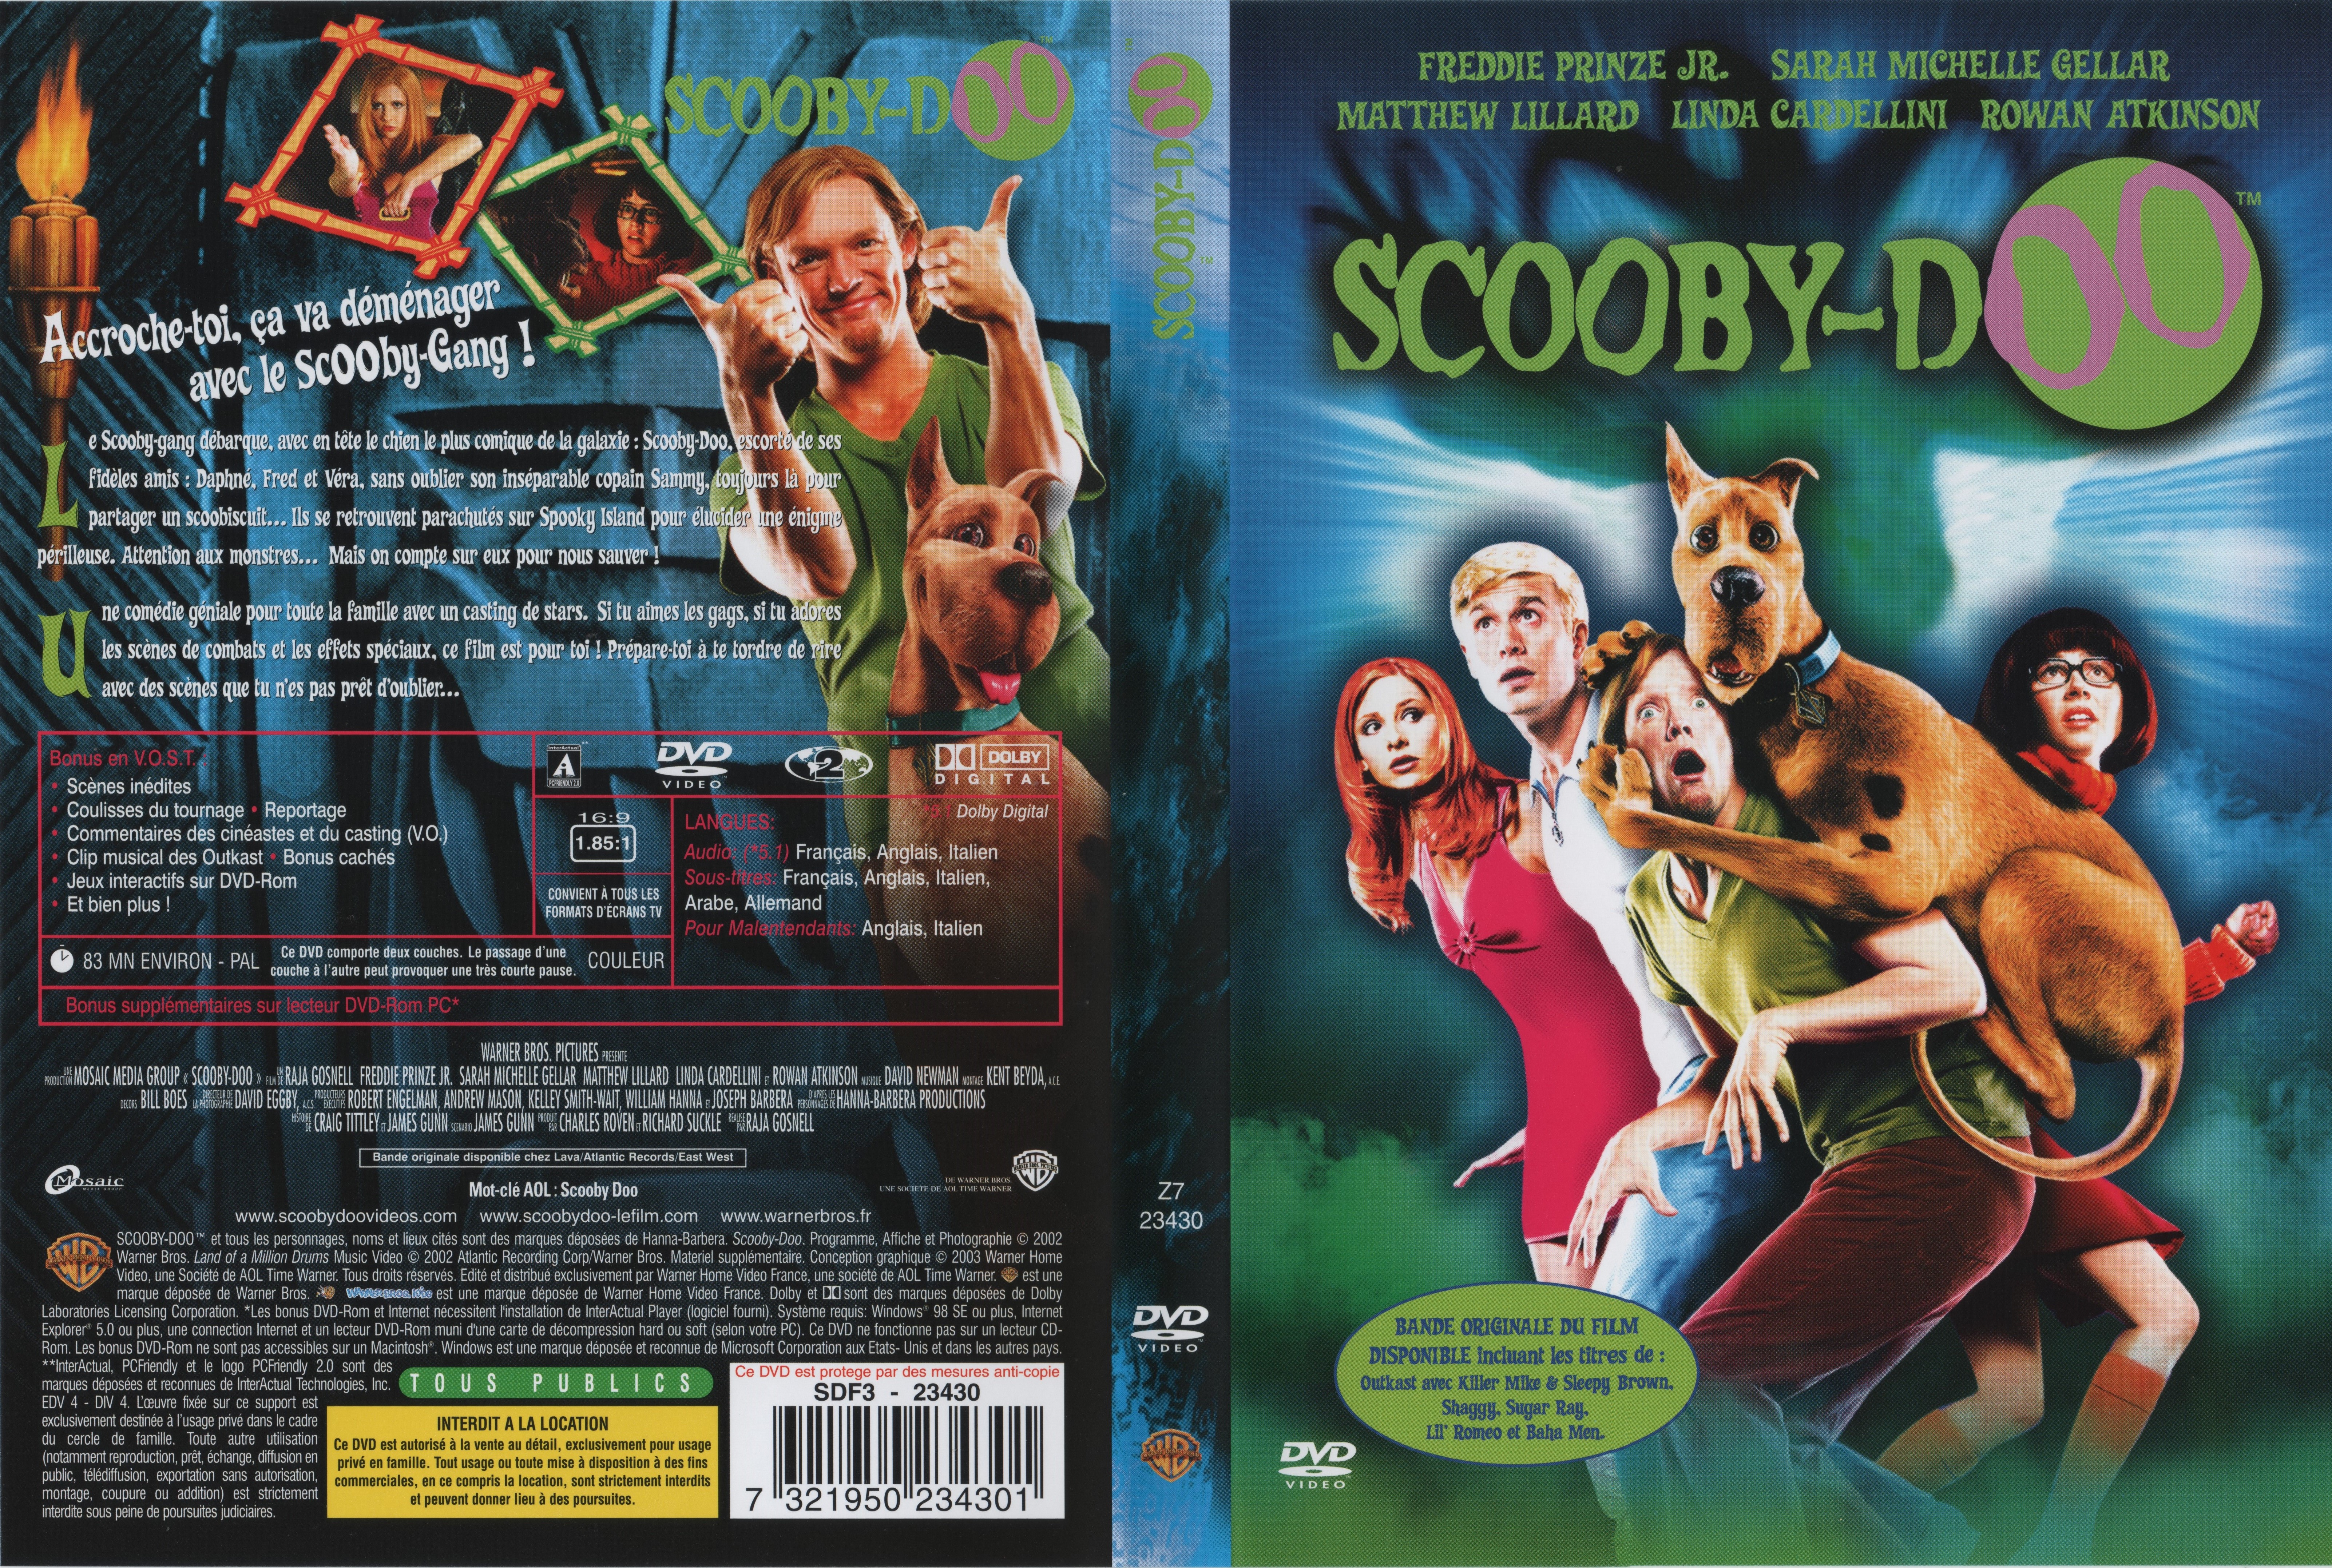 Jaquette DVD Scooby-Doo v2